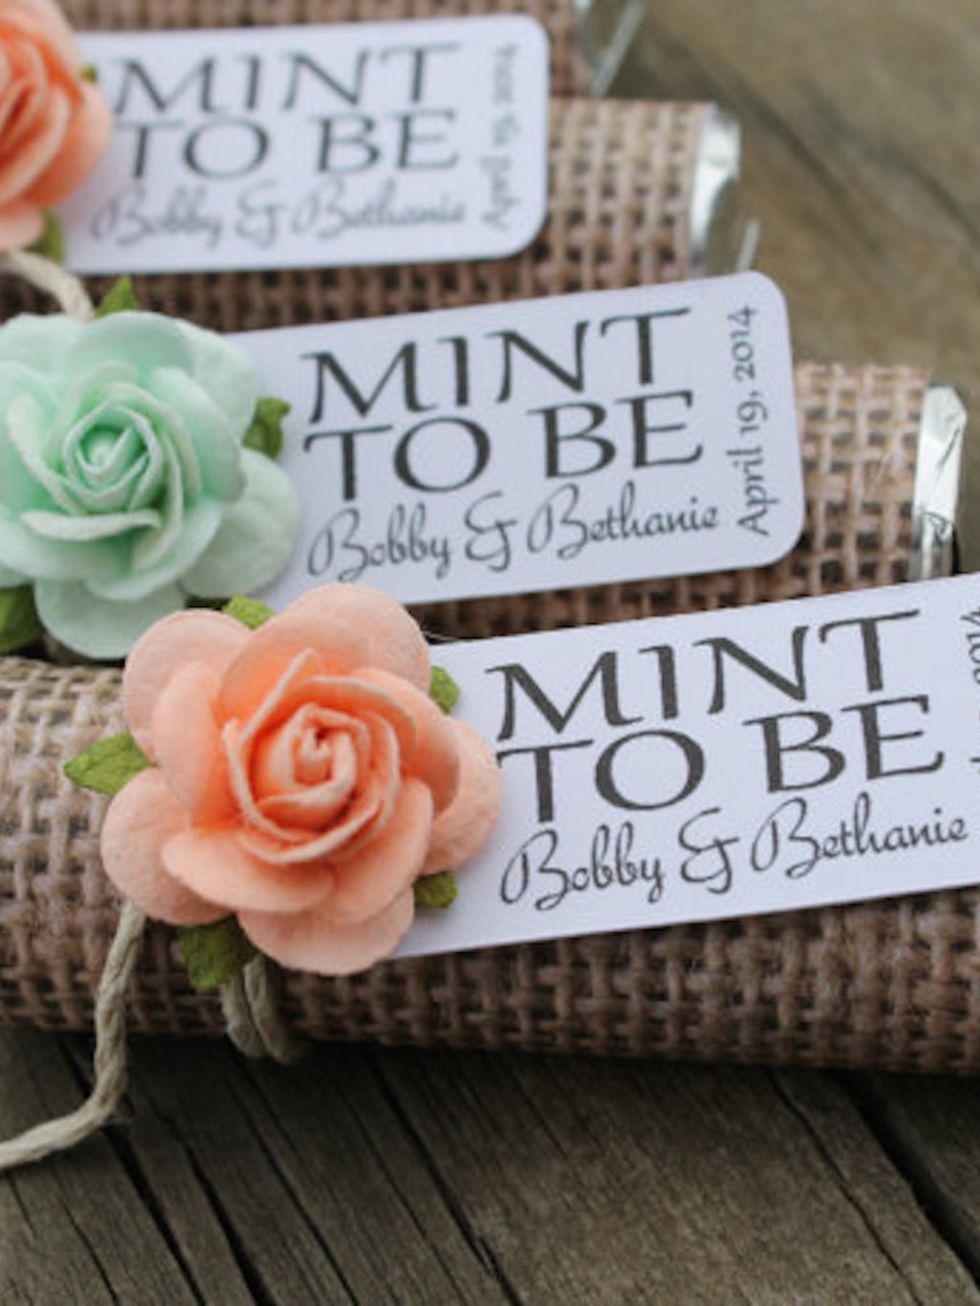 <p>Mint to be, mini-favours - <a href="https://www.etsy.com/uk/listing/150054078/mint-wedding-favors-set-of-24-mint-rolls?ref=shop_home_feat_1" target="_blank">Etsy</a></p>